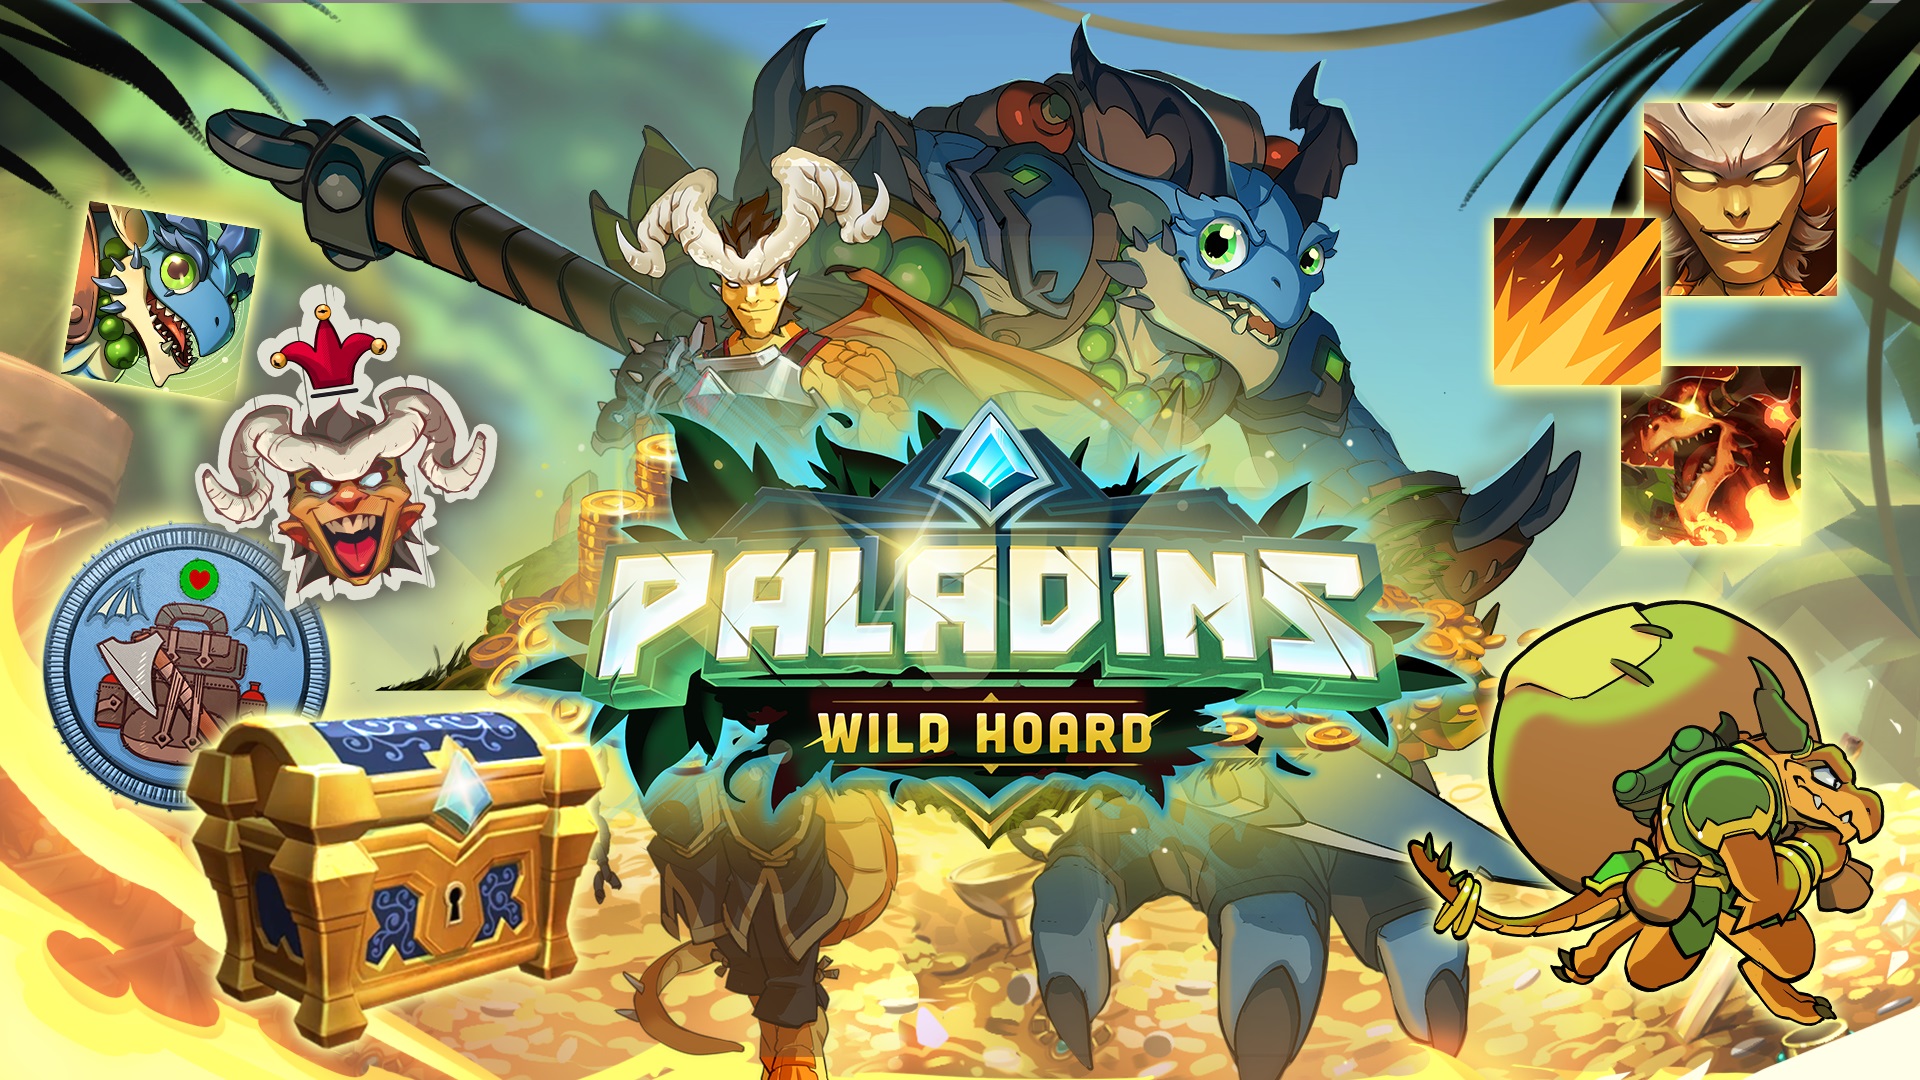 Paladins "Wild Hoard" Update Kicks Off Year 7 With Trials Return, 20 Item Shop, And New Cosmetics